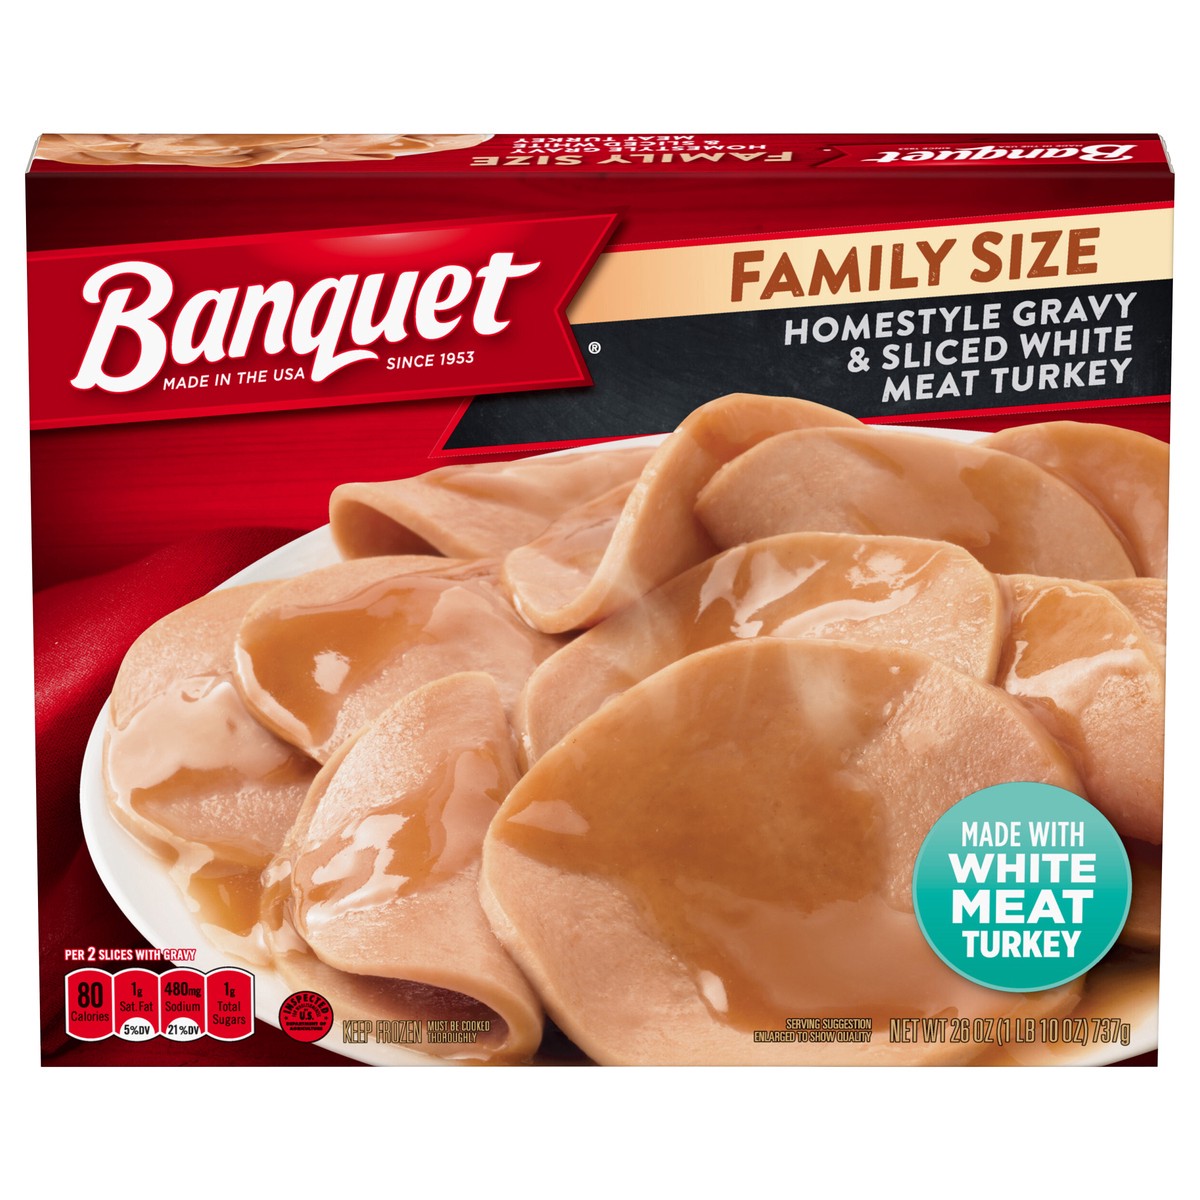 slide 1 of 5, Banquet Family Size Homestyle Gravy and Sliced White Meat Turkey, Frozen Meal, 26 OZ, 26 oz